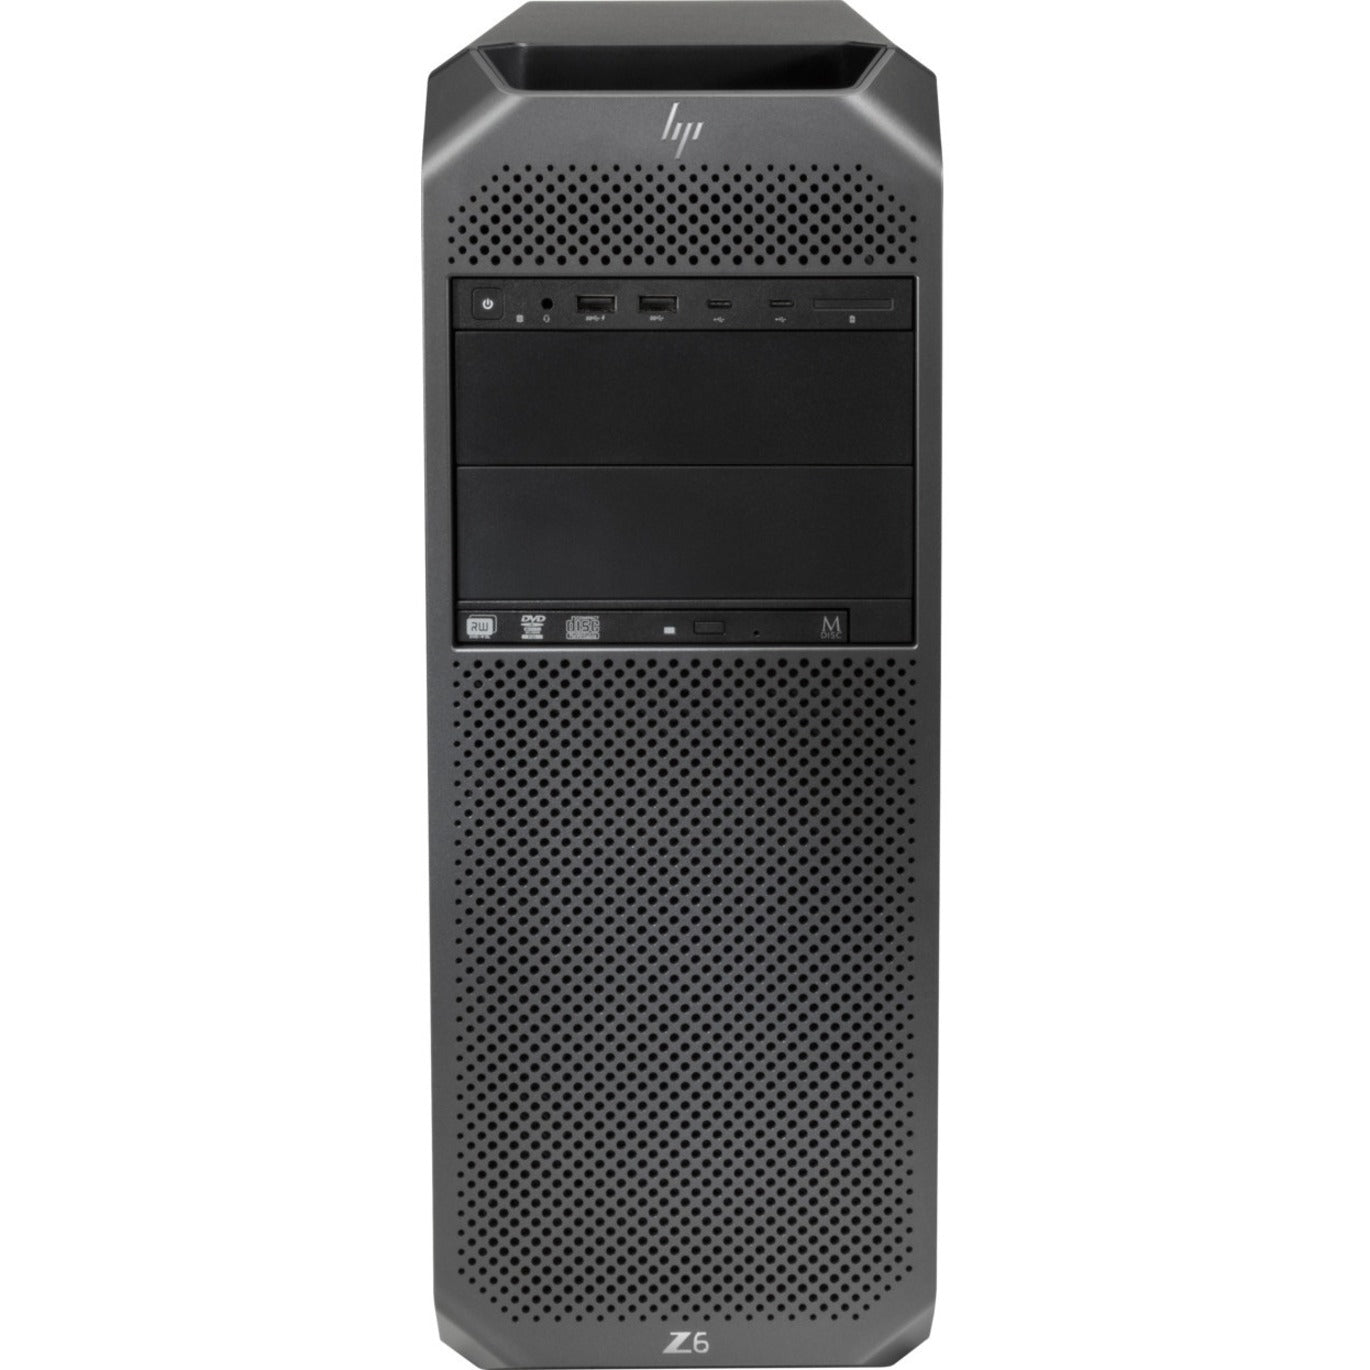 HP Workstation Z6 G4 Tower, Intel Xeon Gold Dodeca-core (12 Core) 4214R 2.40 GHz, 32GB RAM, 512GB SSD